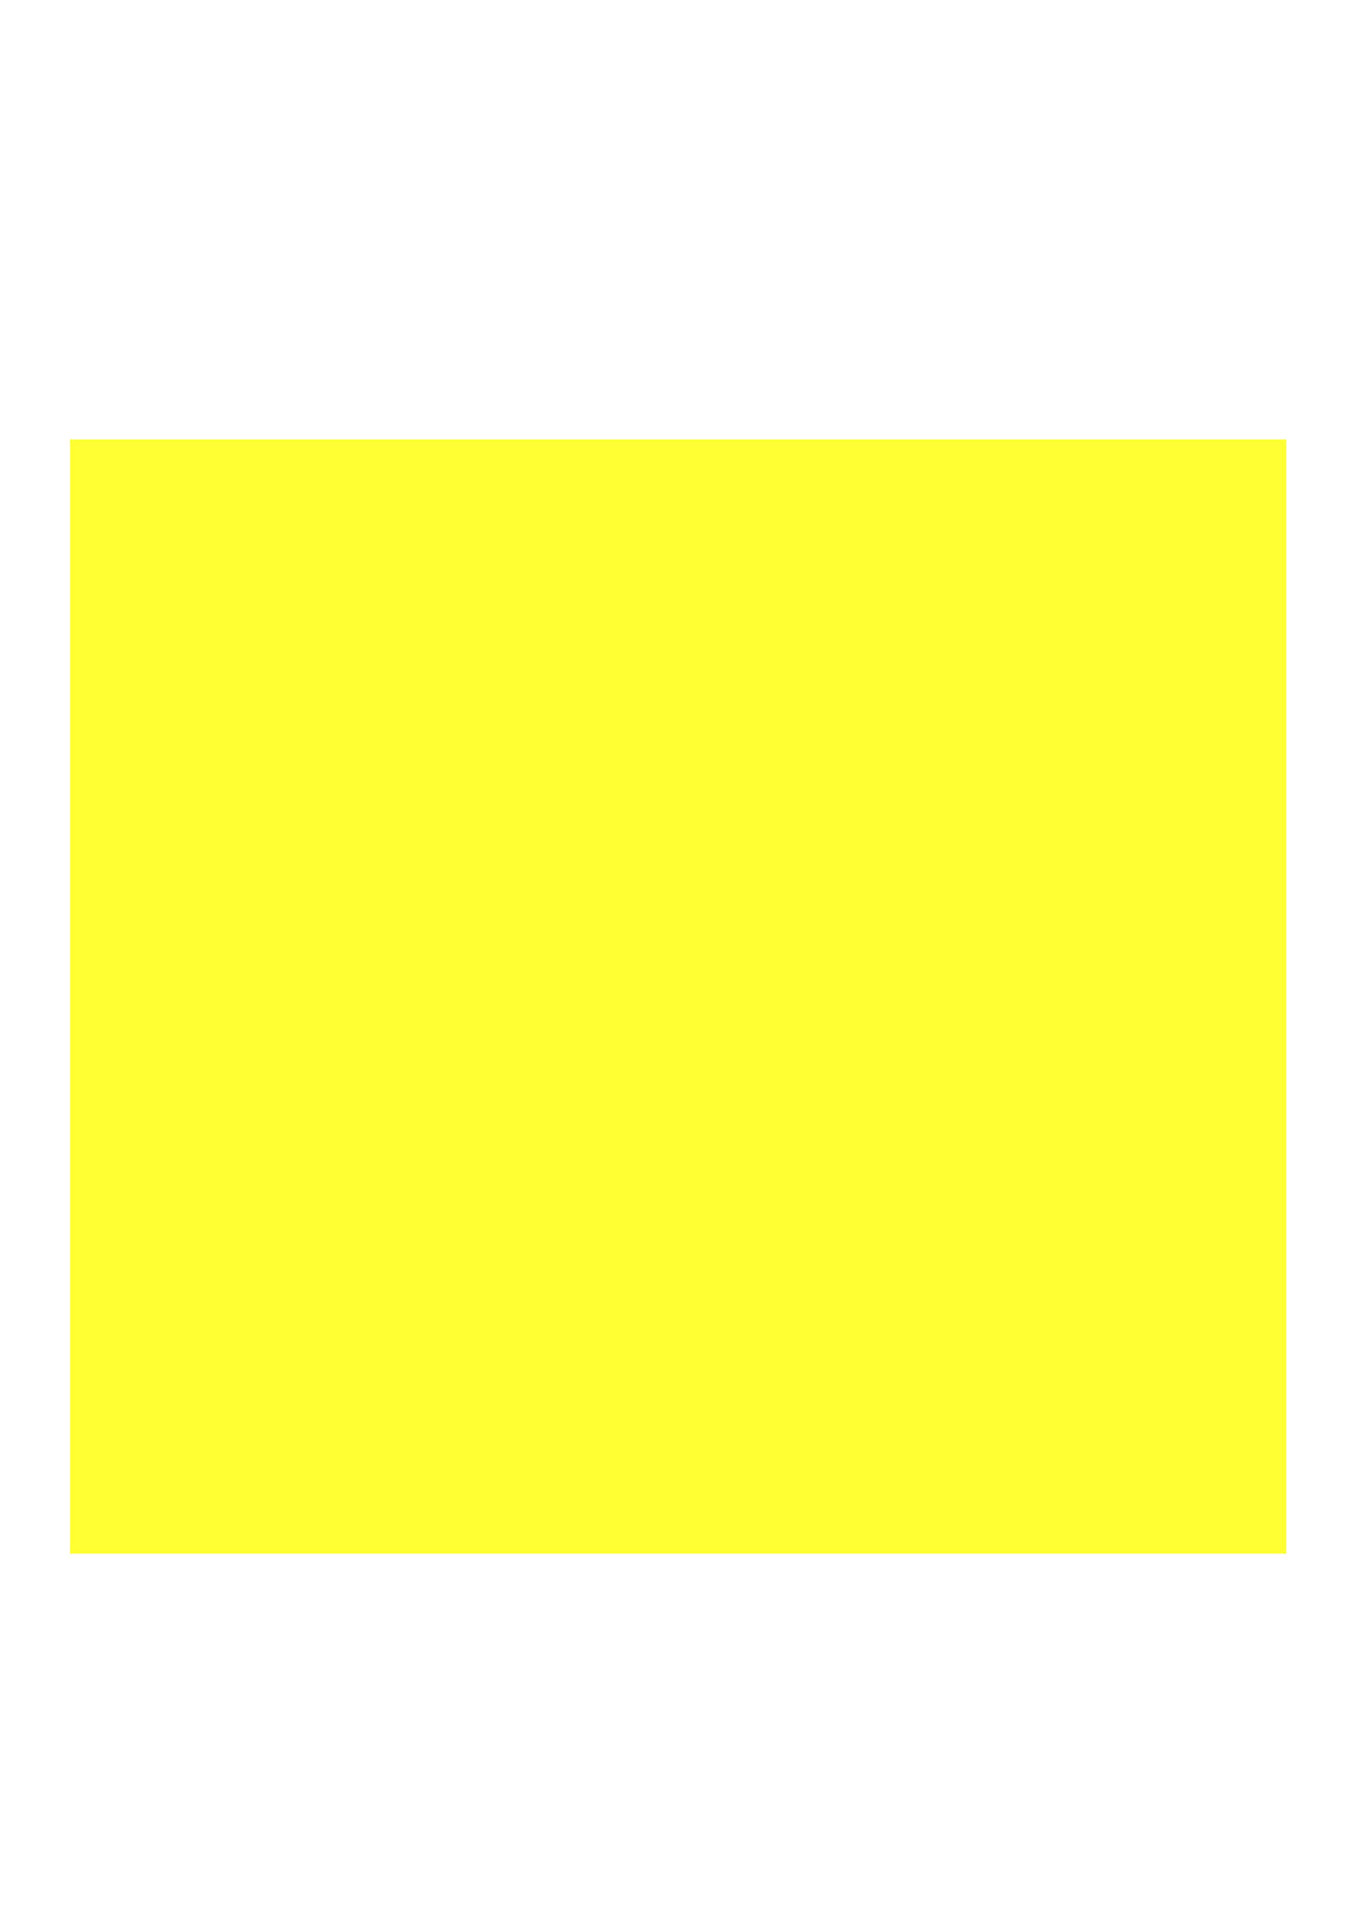 Basic Yellow Square Free Stock Photo - Public Domain Pictures